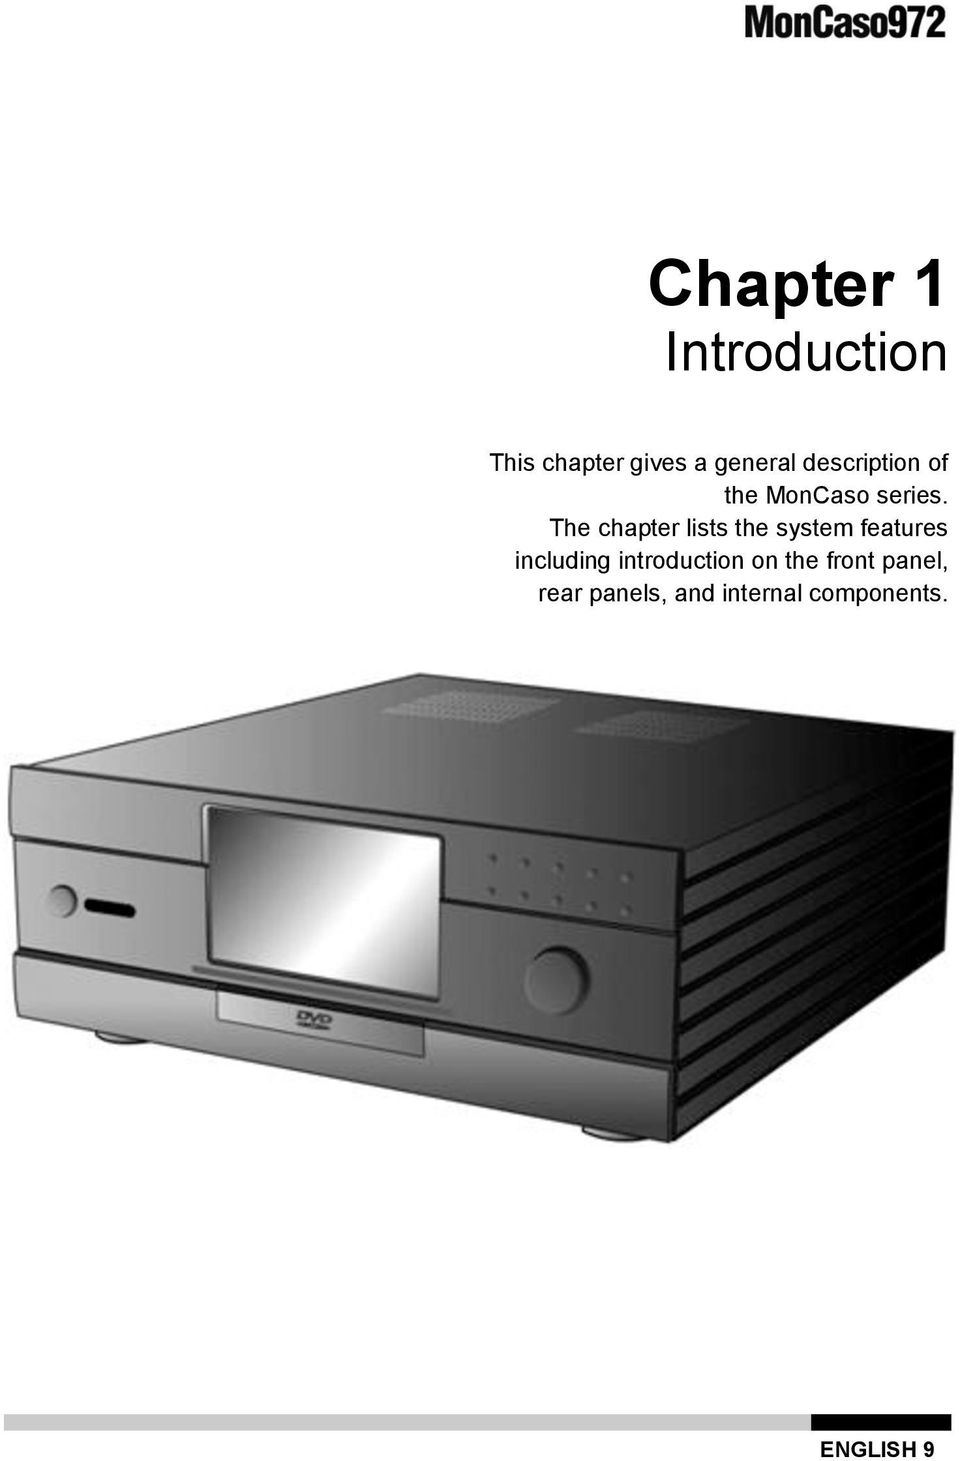 The chapter lists the system features including